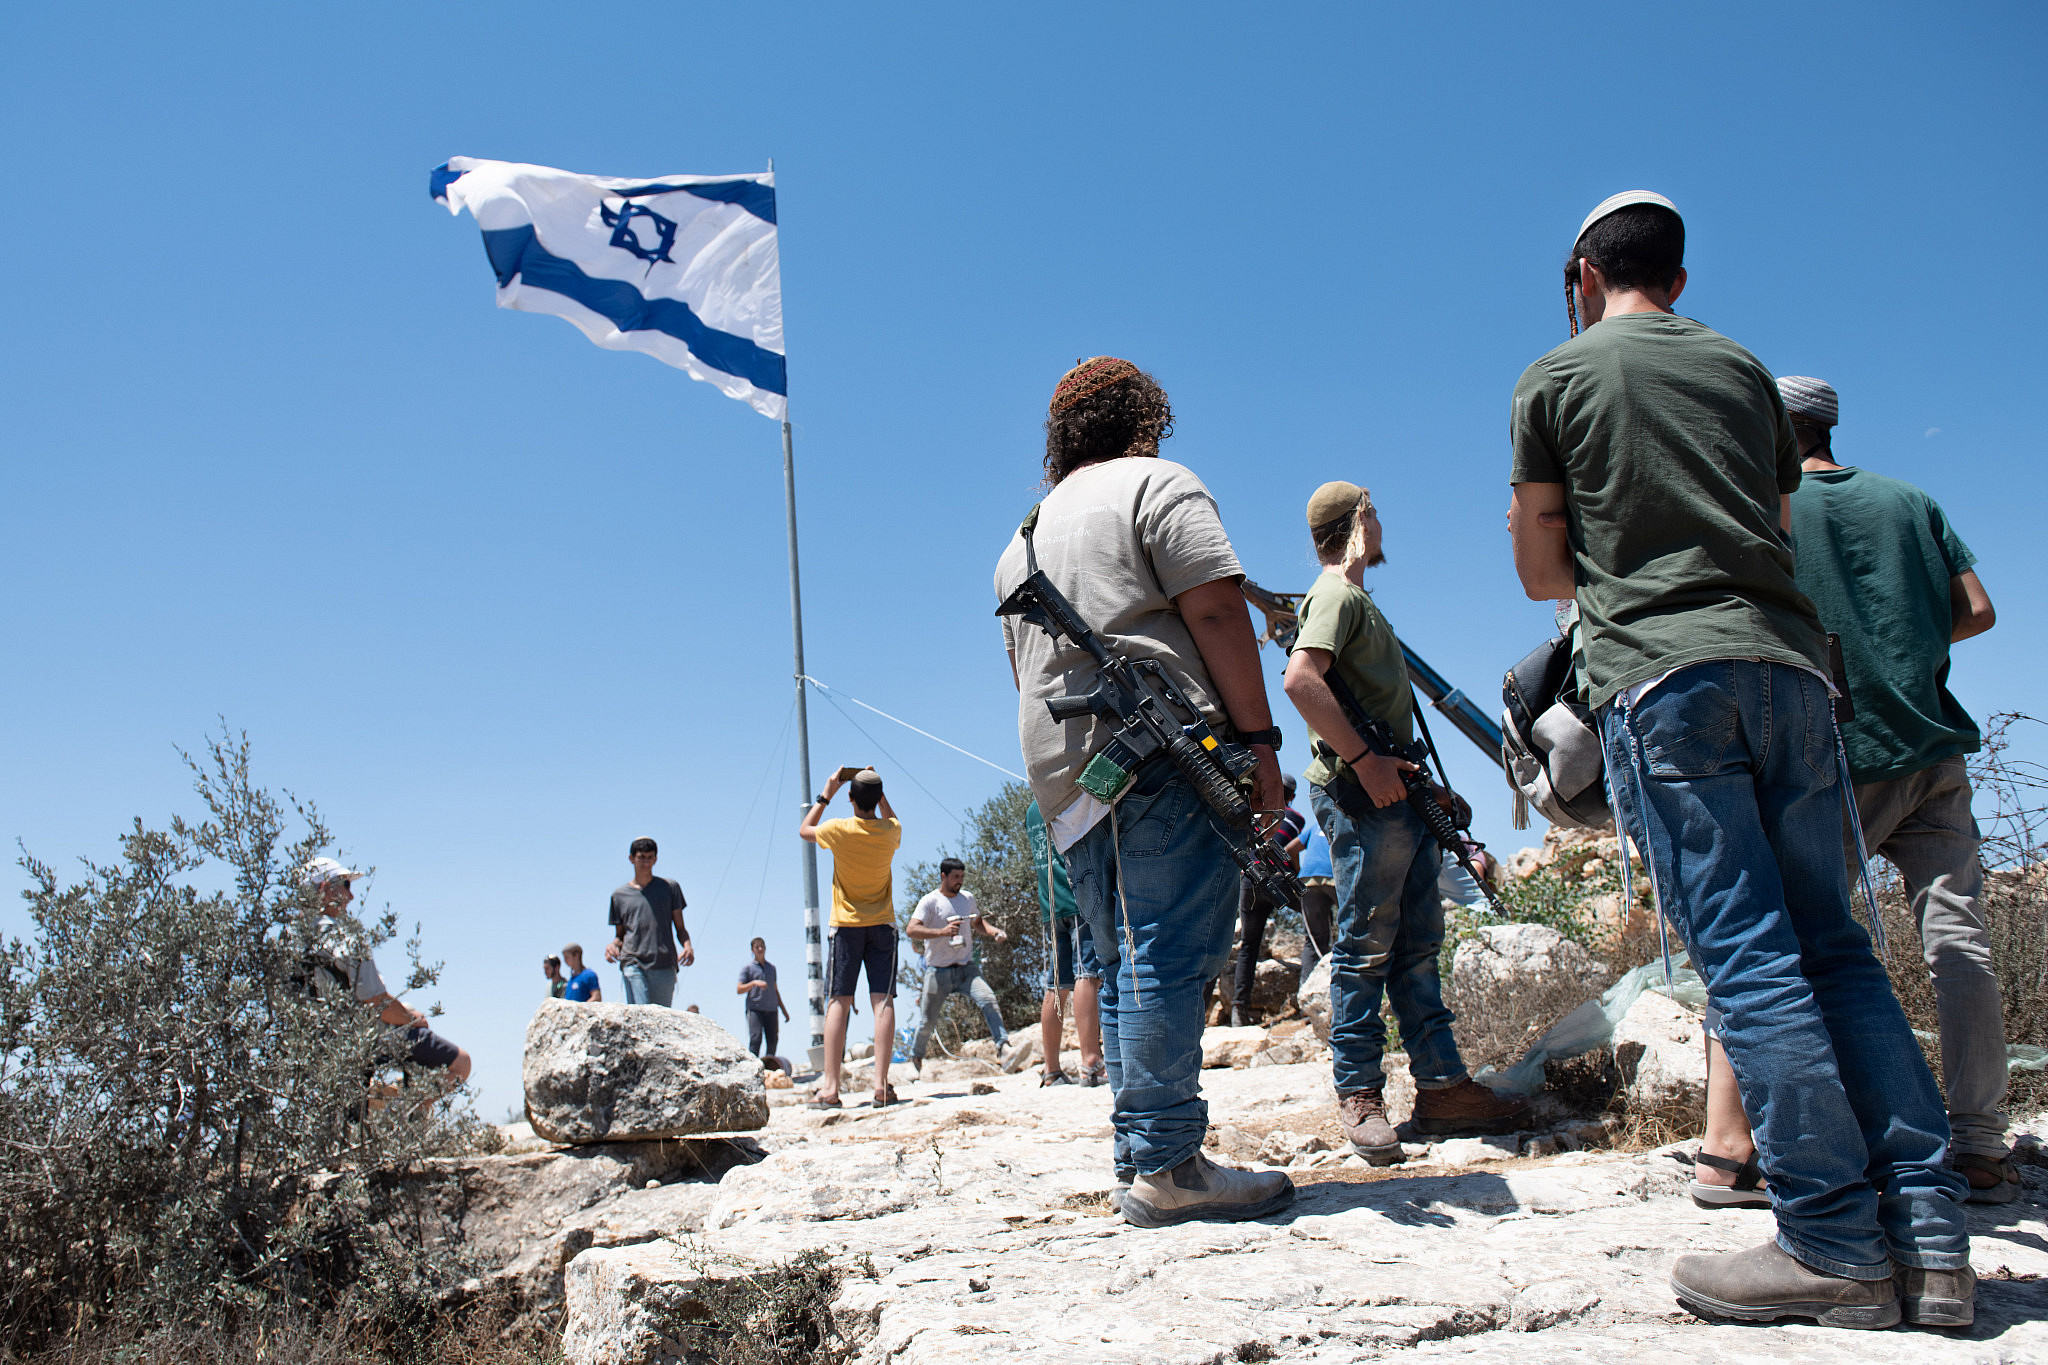 Jewish settlers place up a large Israeli flags at the illegal settlement outpost of Evyatar, before it evacuation as part of a deal with the government, July 2, 2021. (Sraya Diamant/Flash90)